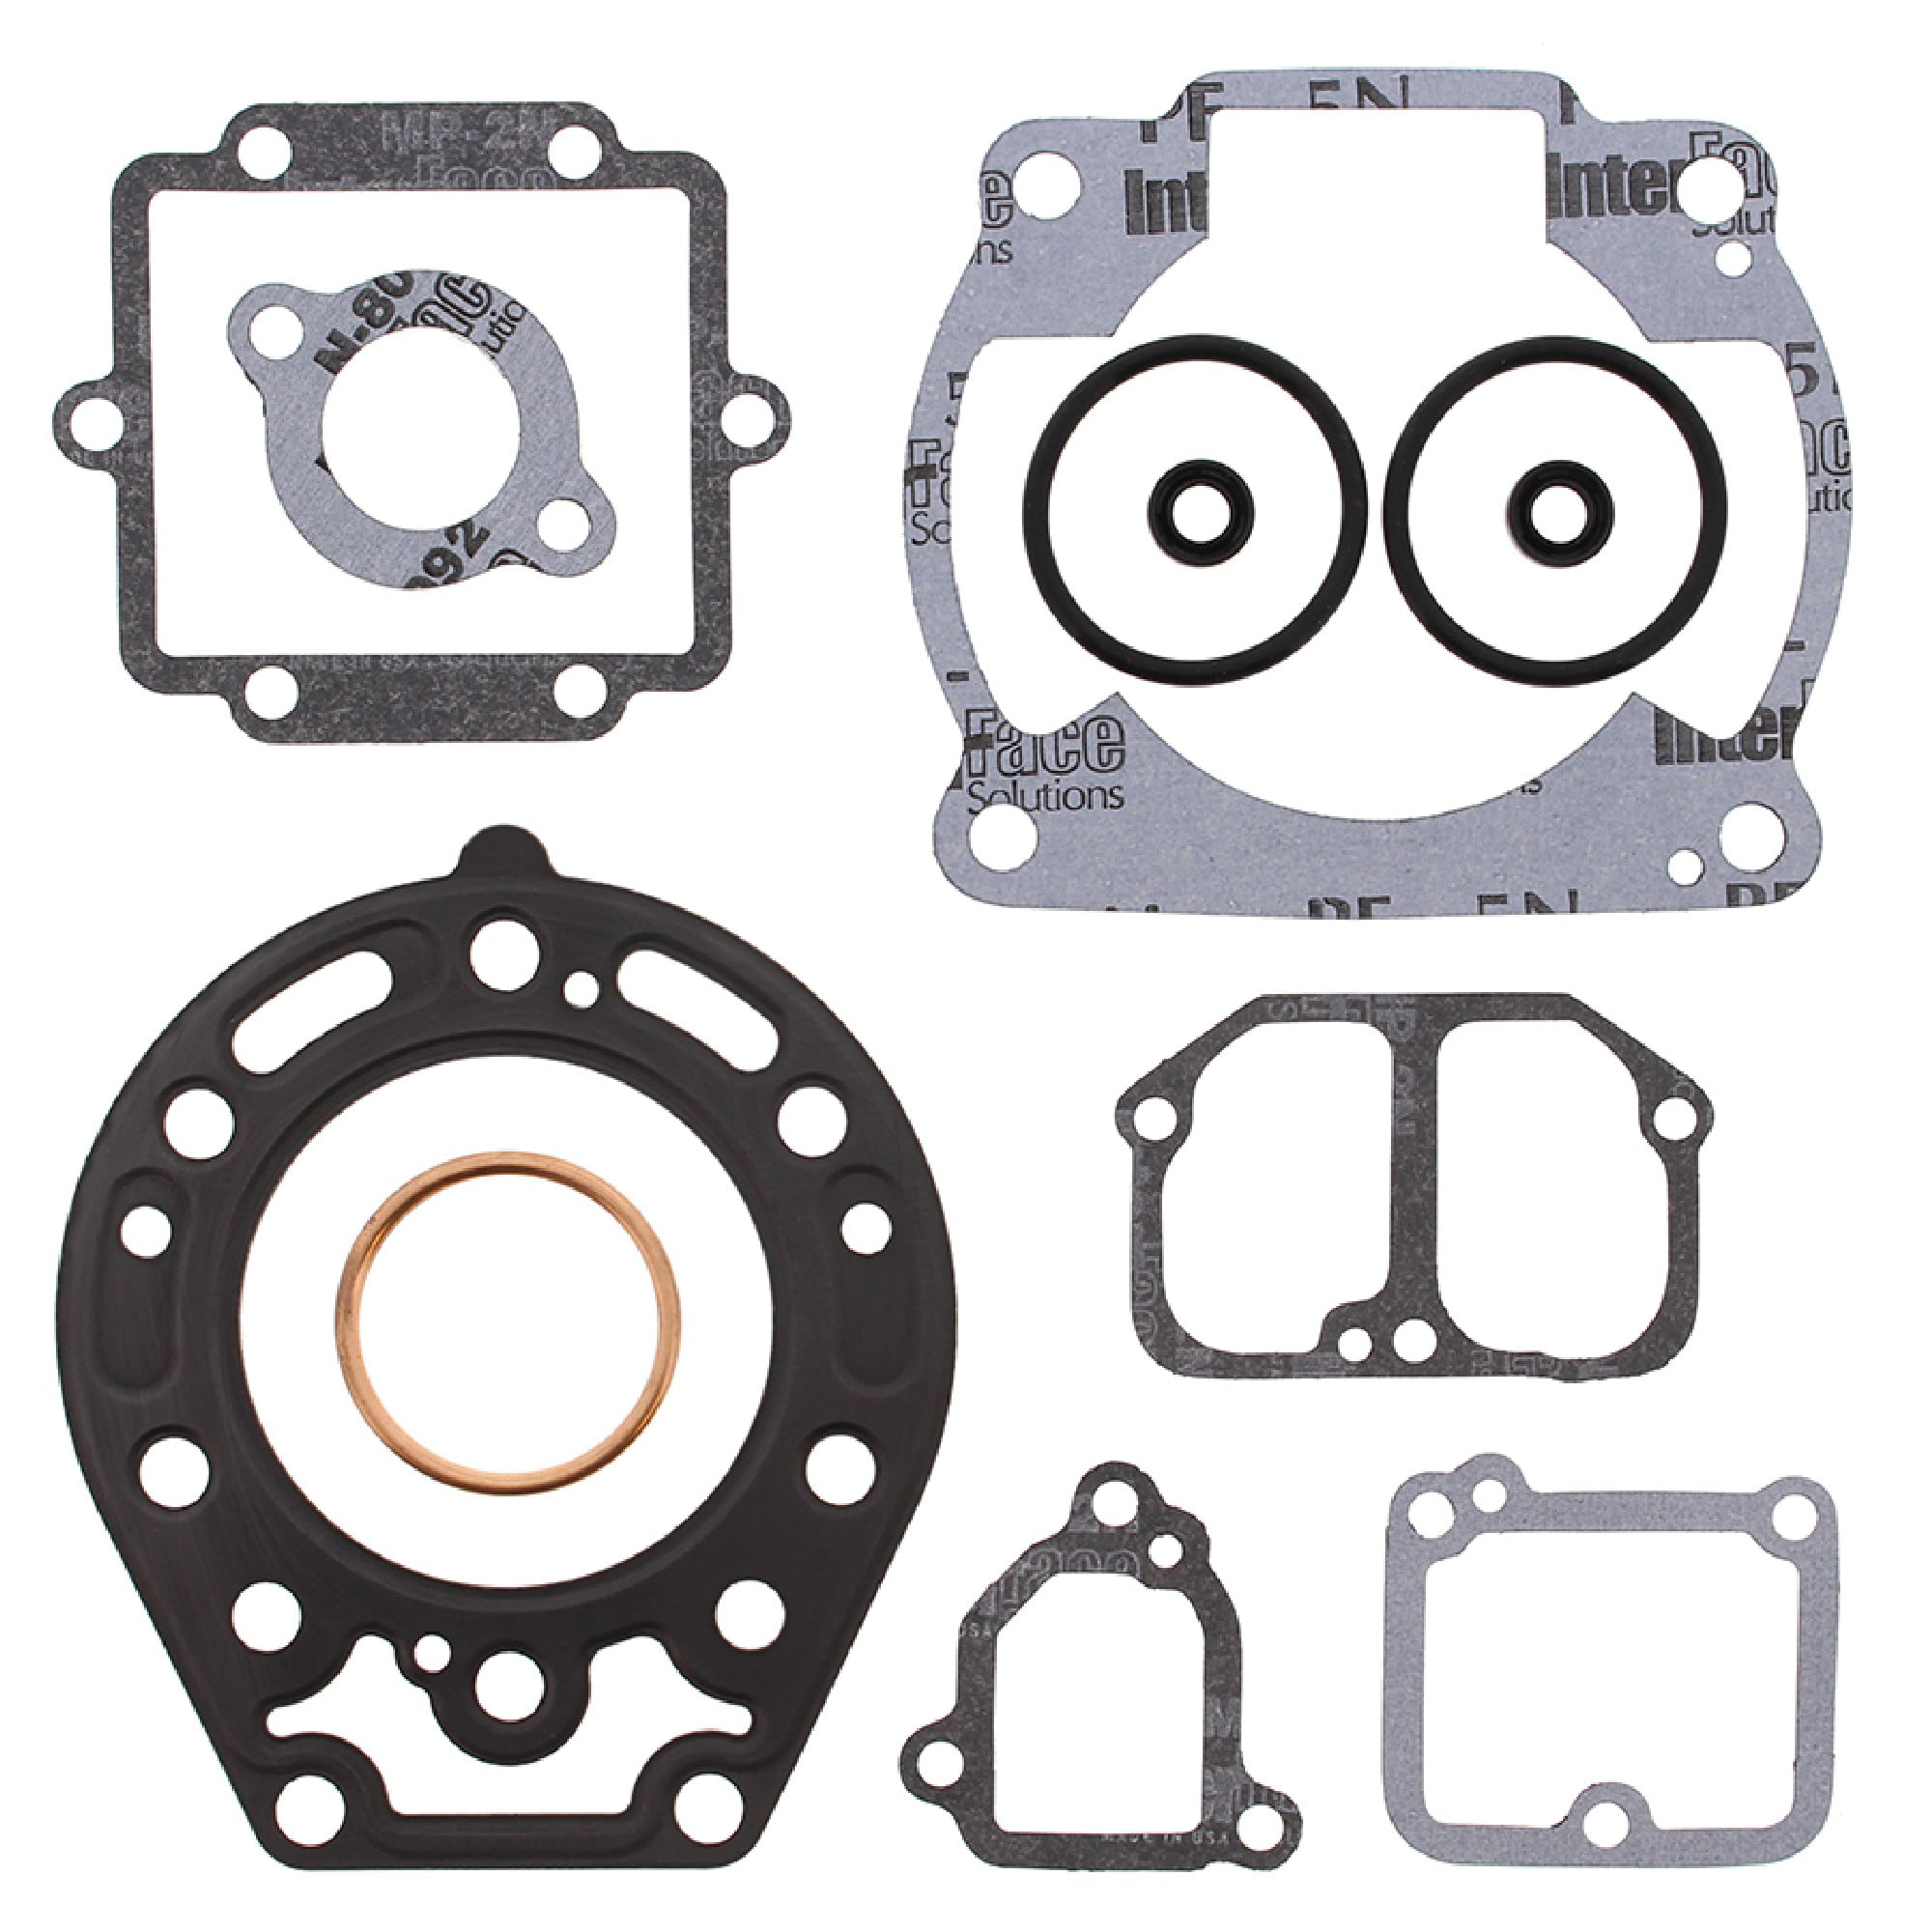 Details about   Exhaust Gasket Kit For 1986 Kawasaki KDX200 Offroad Motorcycle Winderosa 823159 